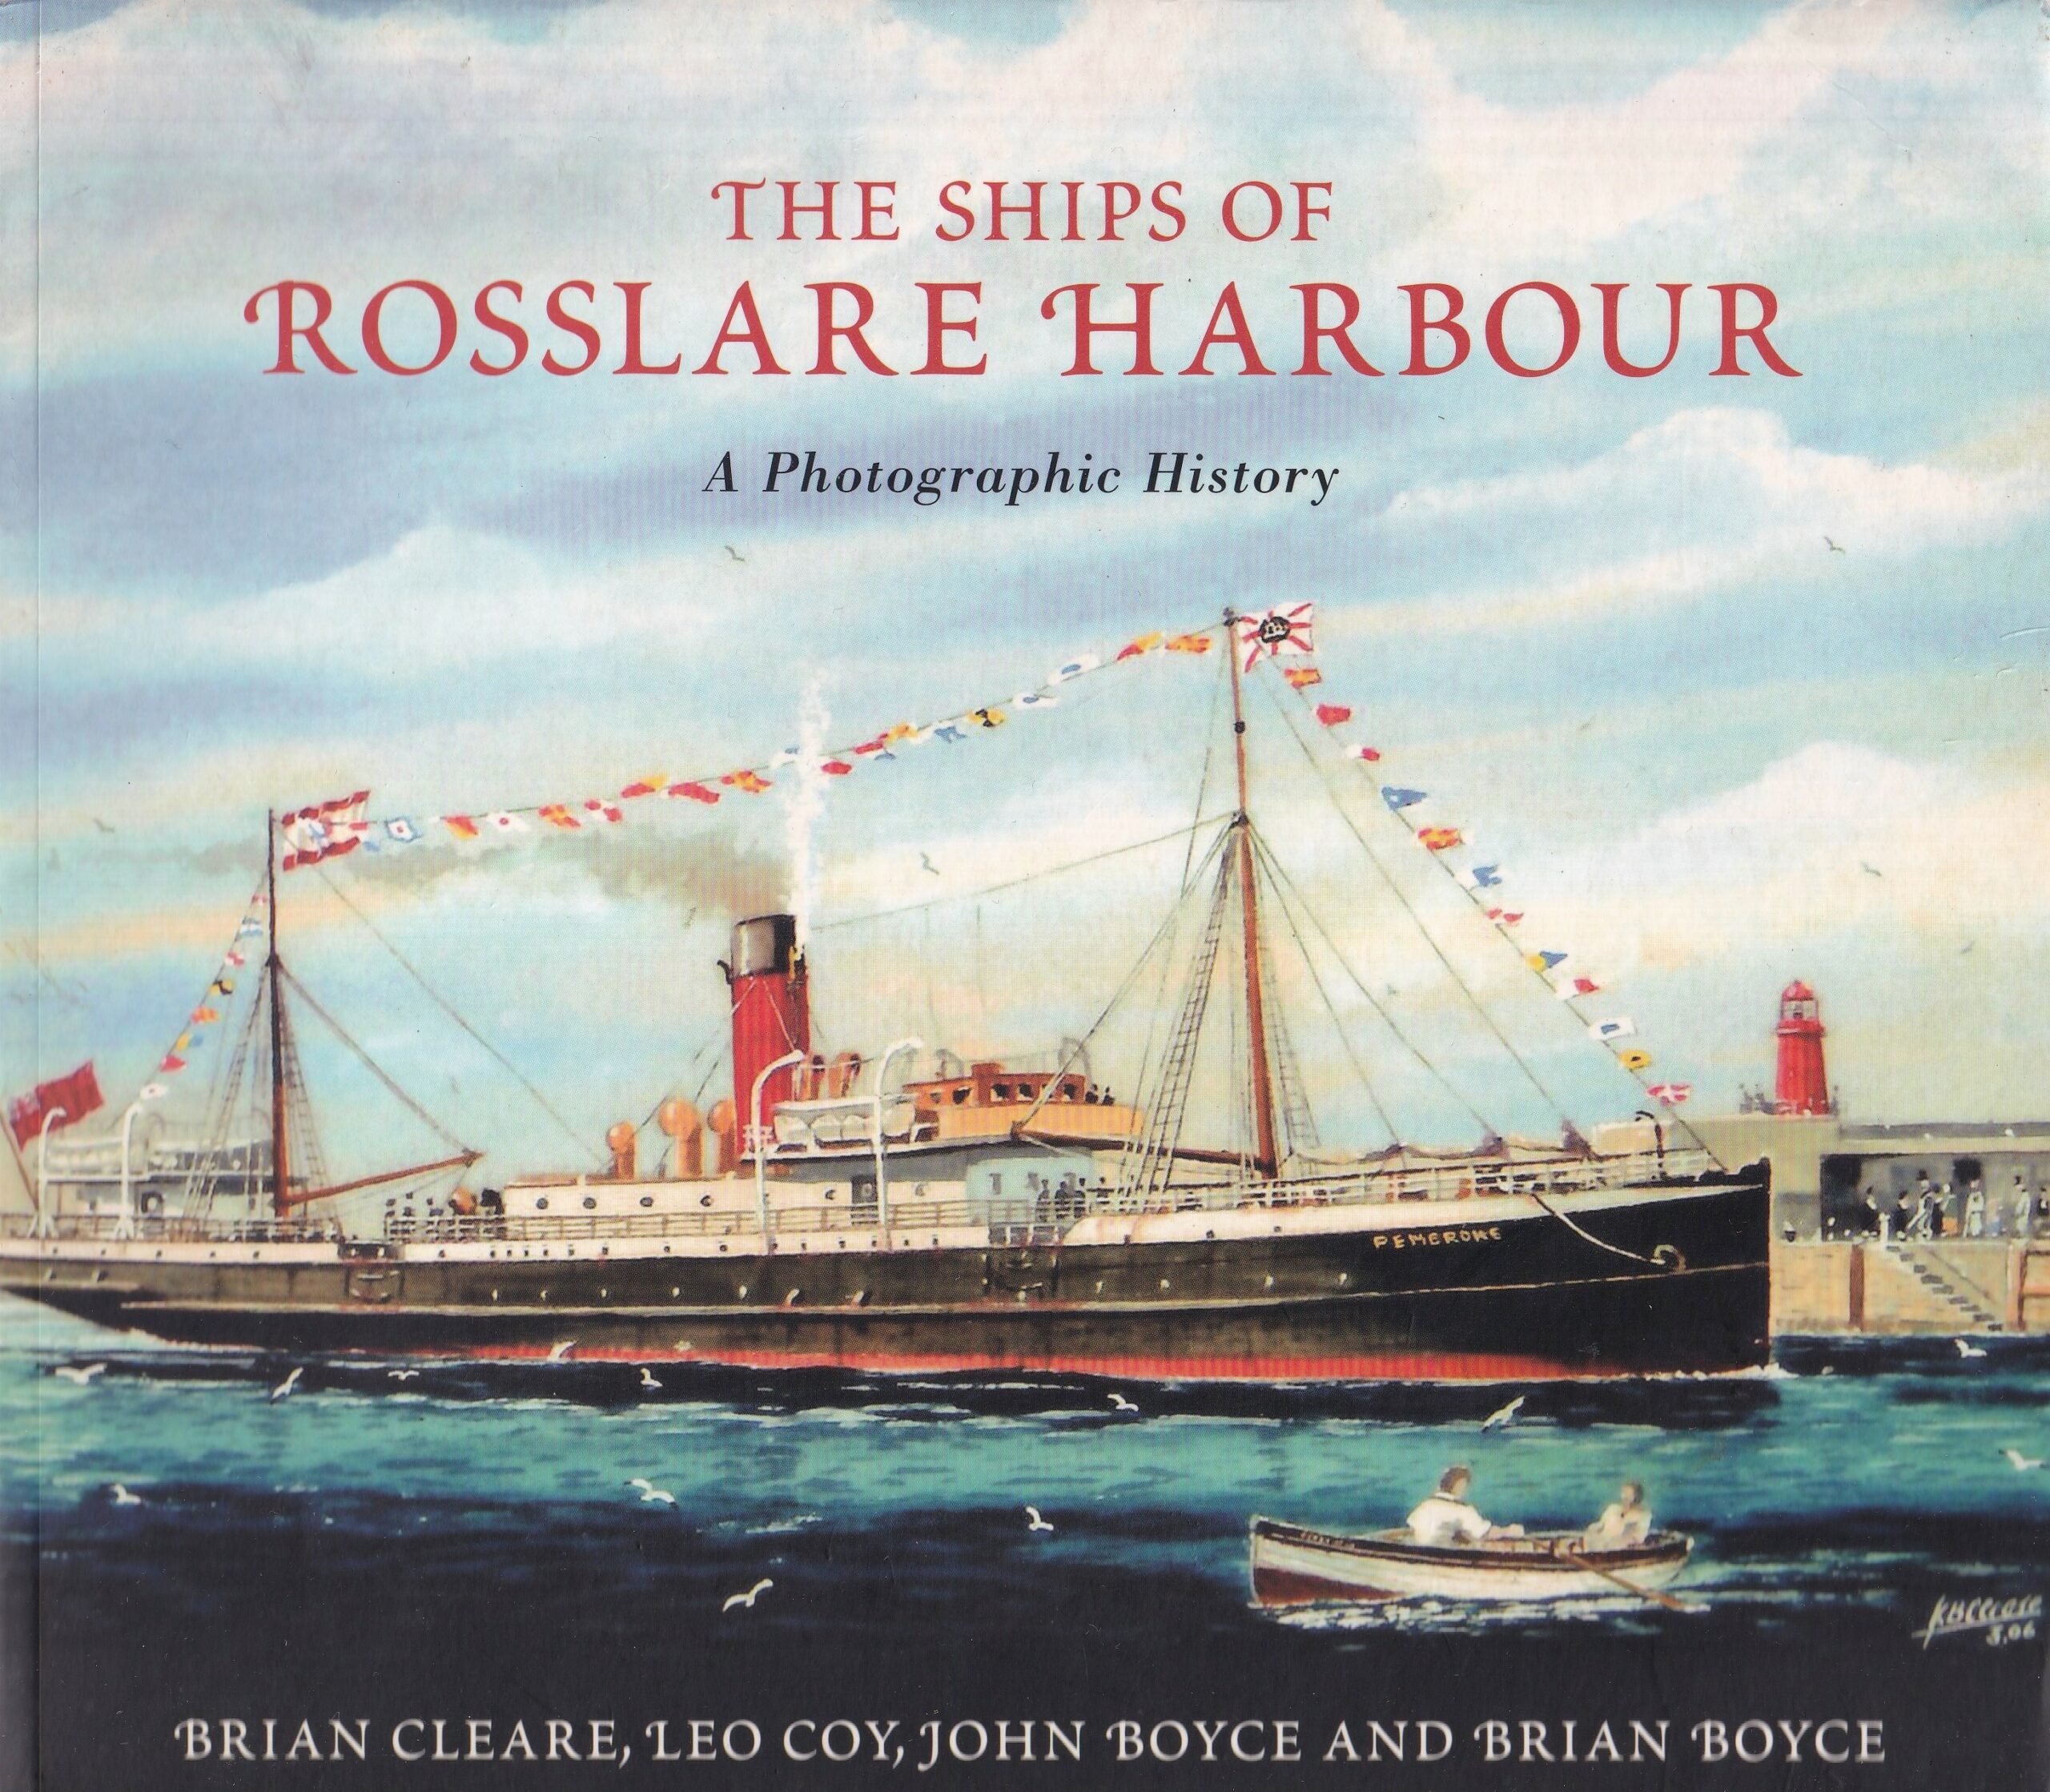 The Ships of Rosslare Harbour: A Photographic History | Brian Cleare, Leo Coy, John Boyce and Brian Boyce | Charlie Byrne's